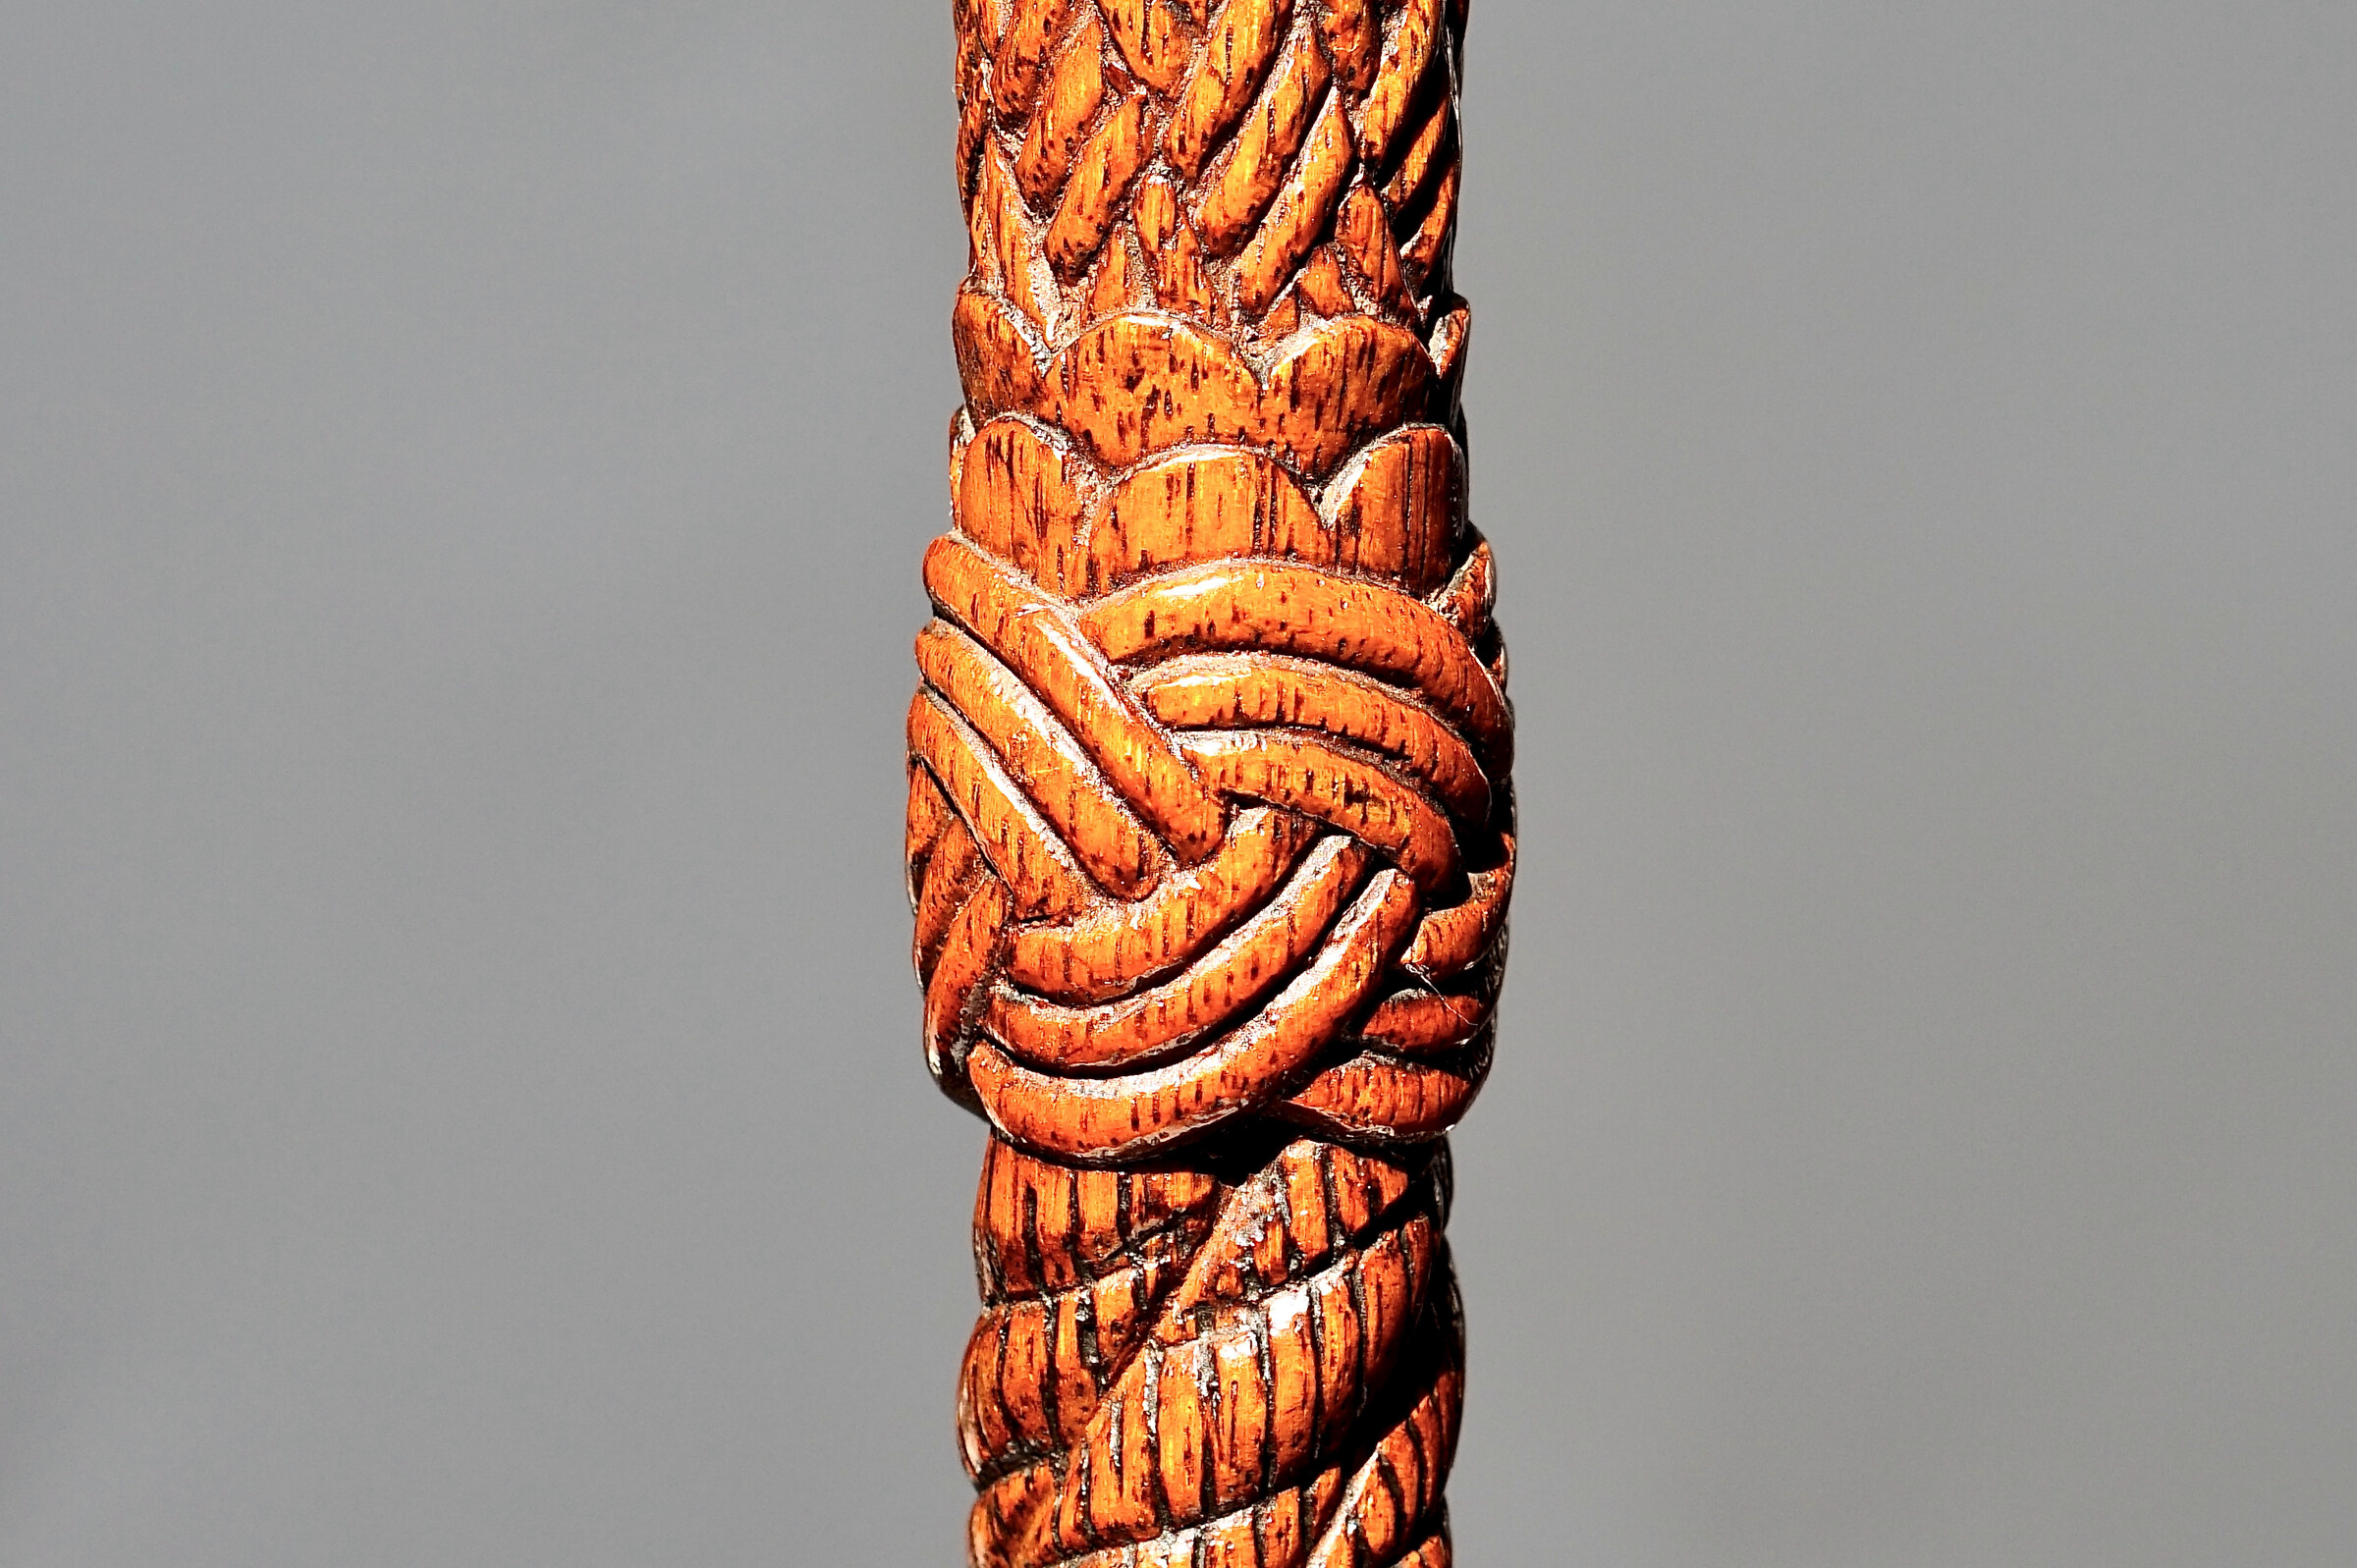 Whalers Art One-piece of wood Walking stick, U.S.A. or England ca. 1880